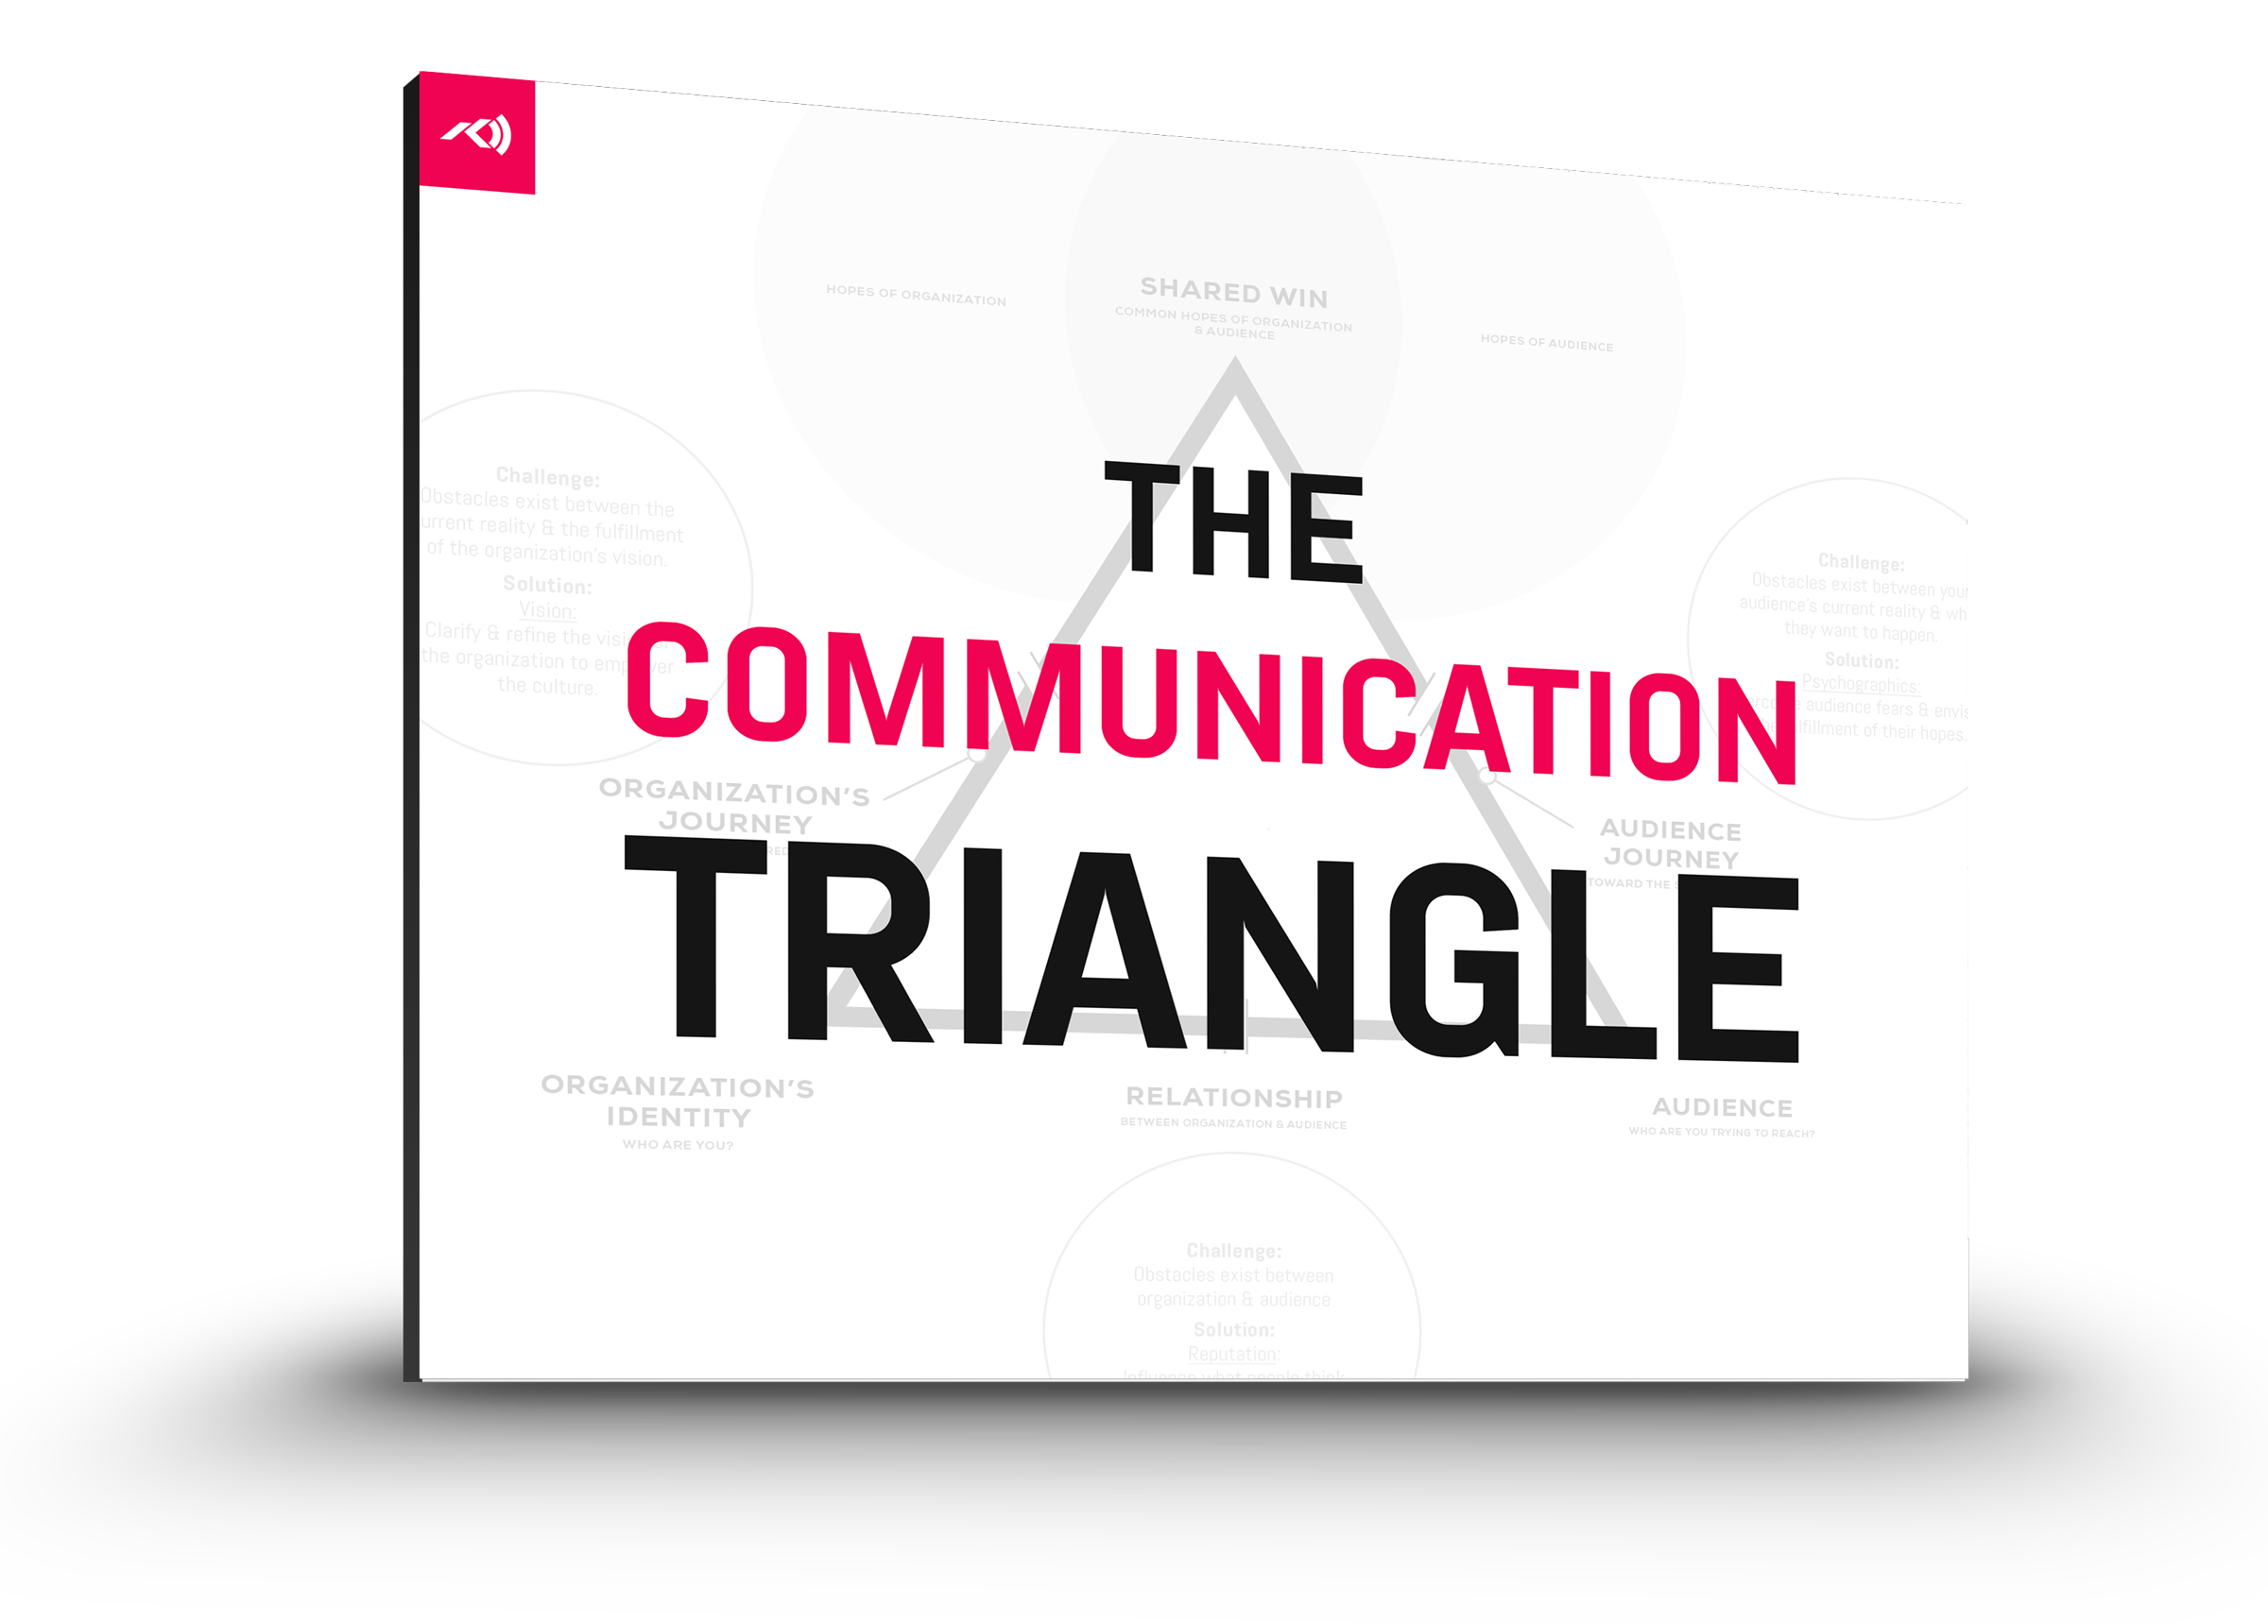 Download: The Communication Triangle